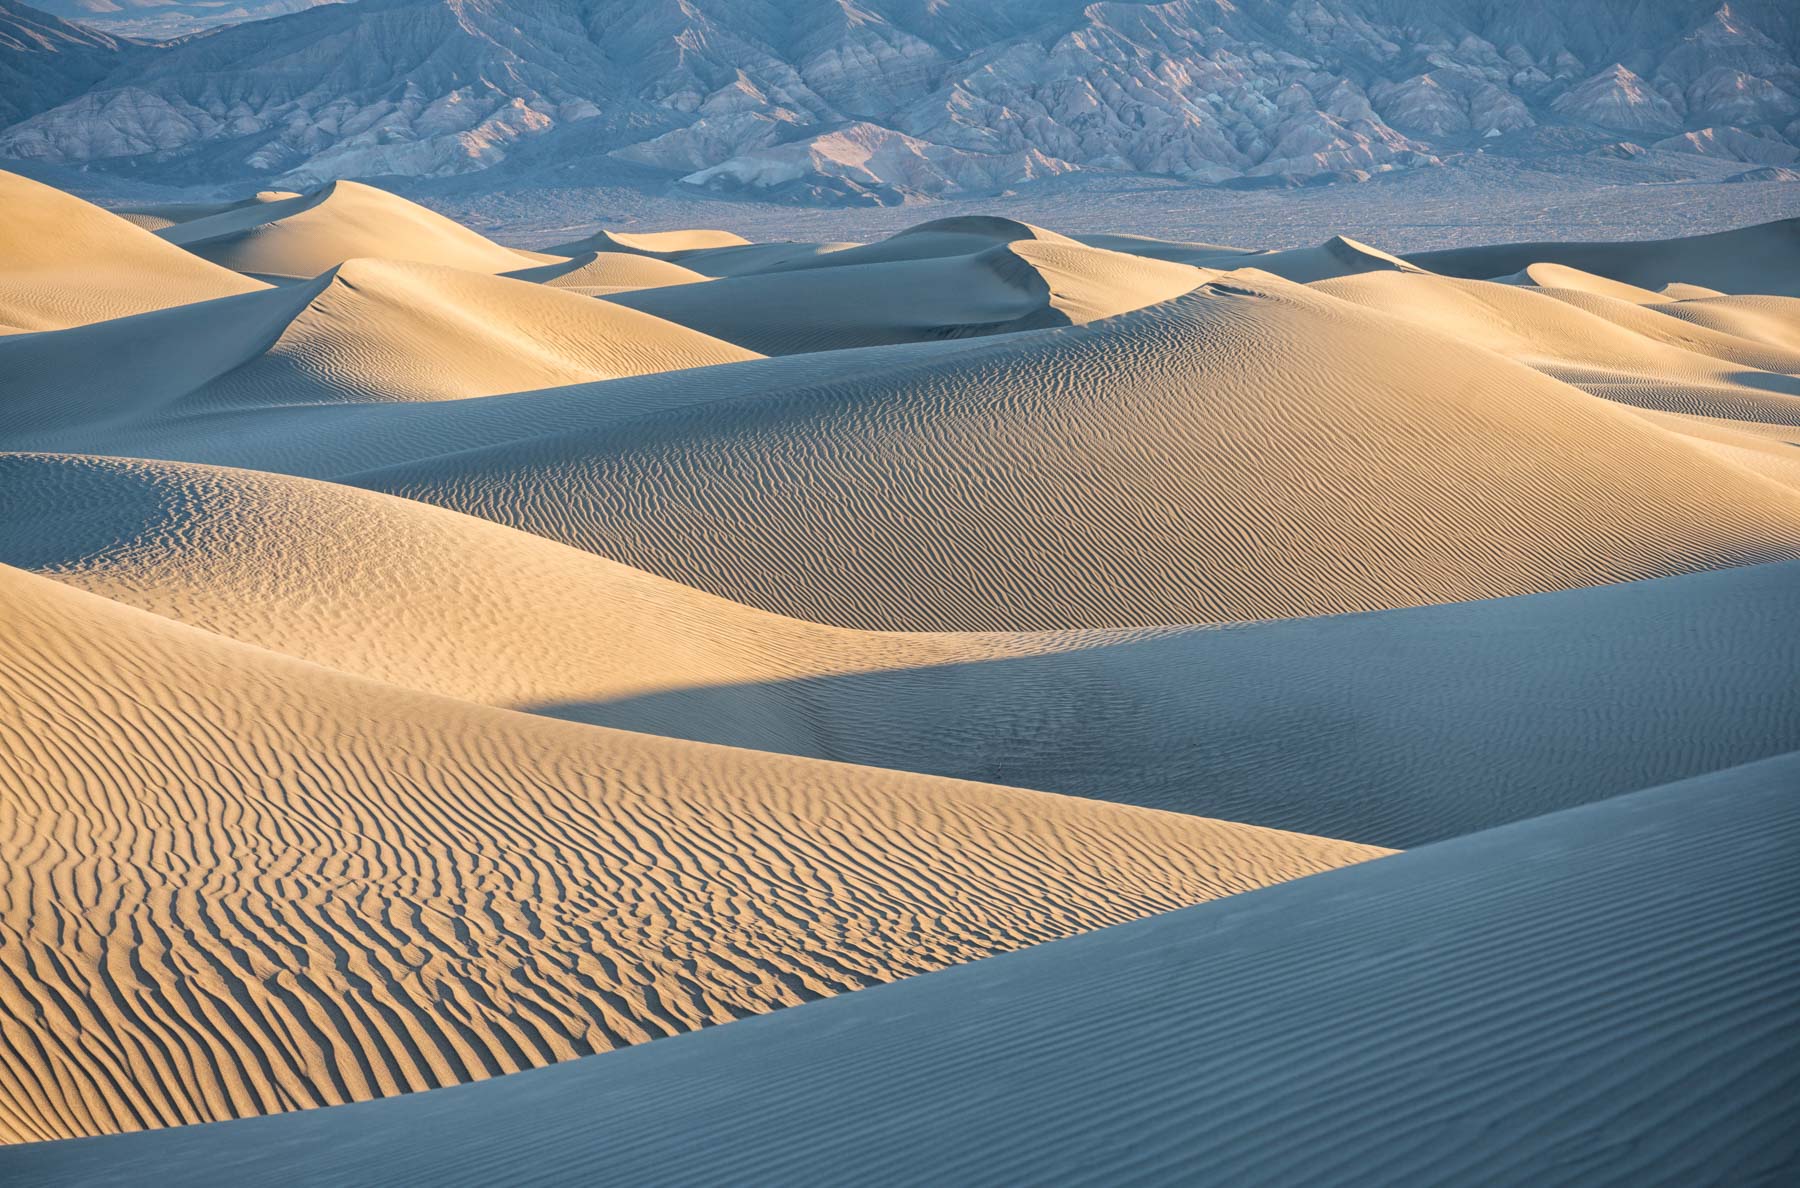 Mesquite Dunes at Dawn in Death Valley National Park, California